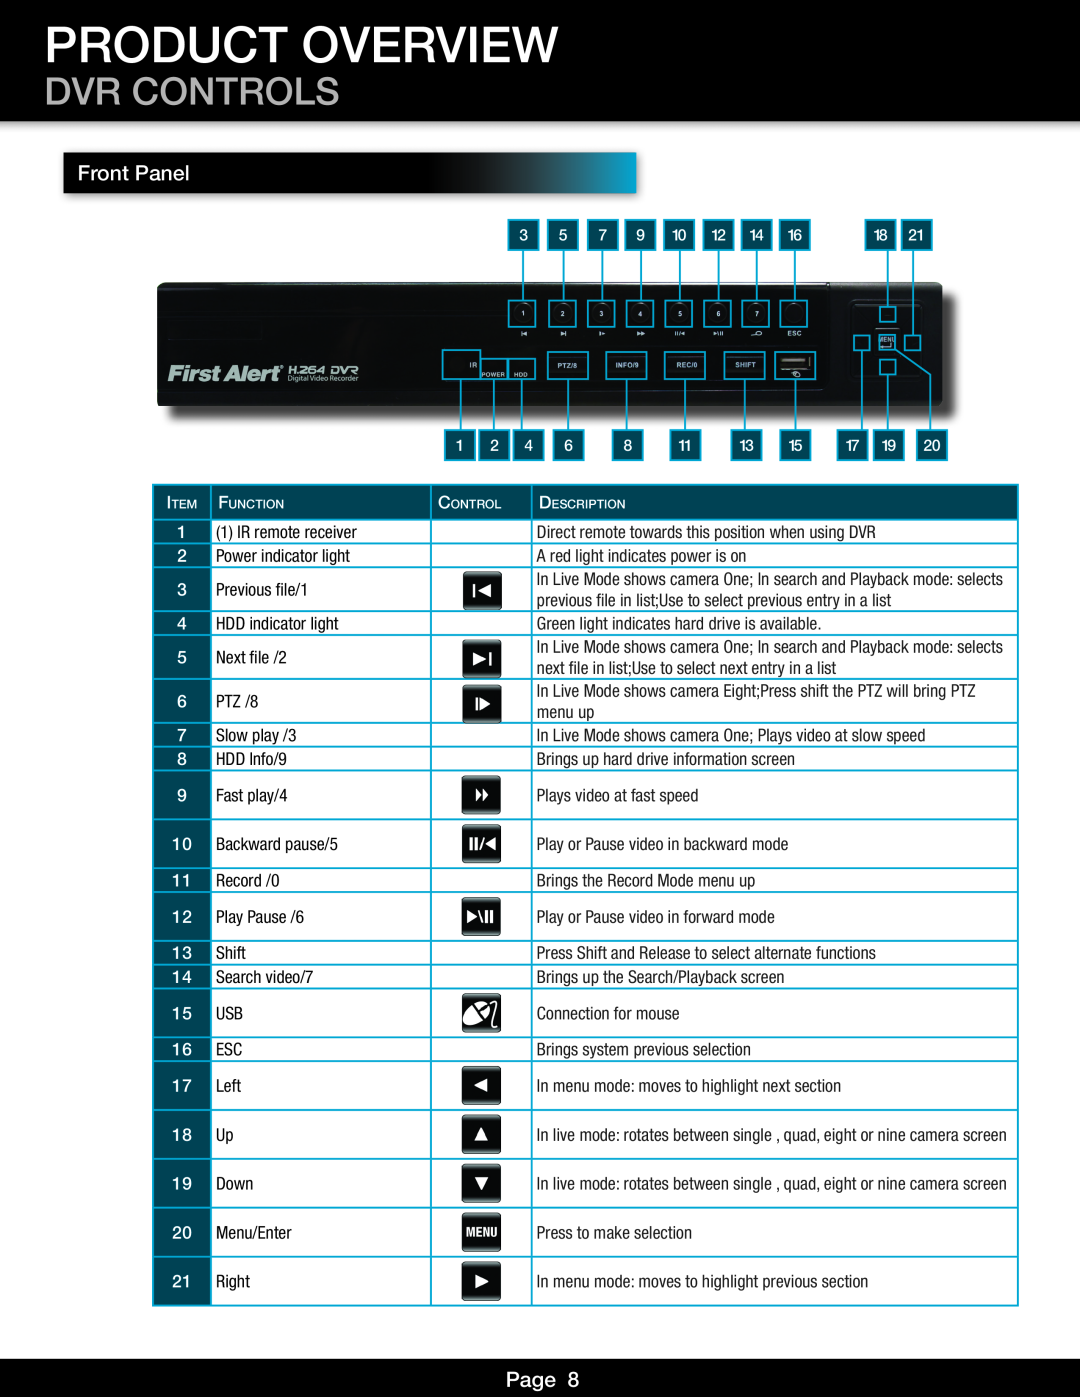 First Alert DVR0805, DVR0810 user manual Dvr Controls, Product Overview, Front Panel, Page 